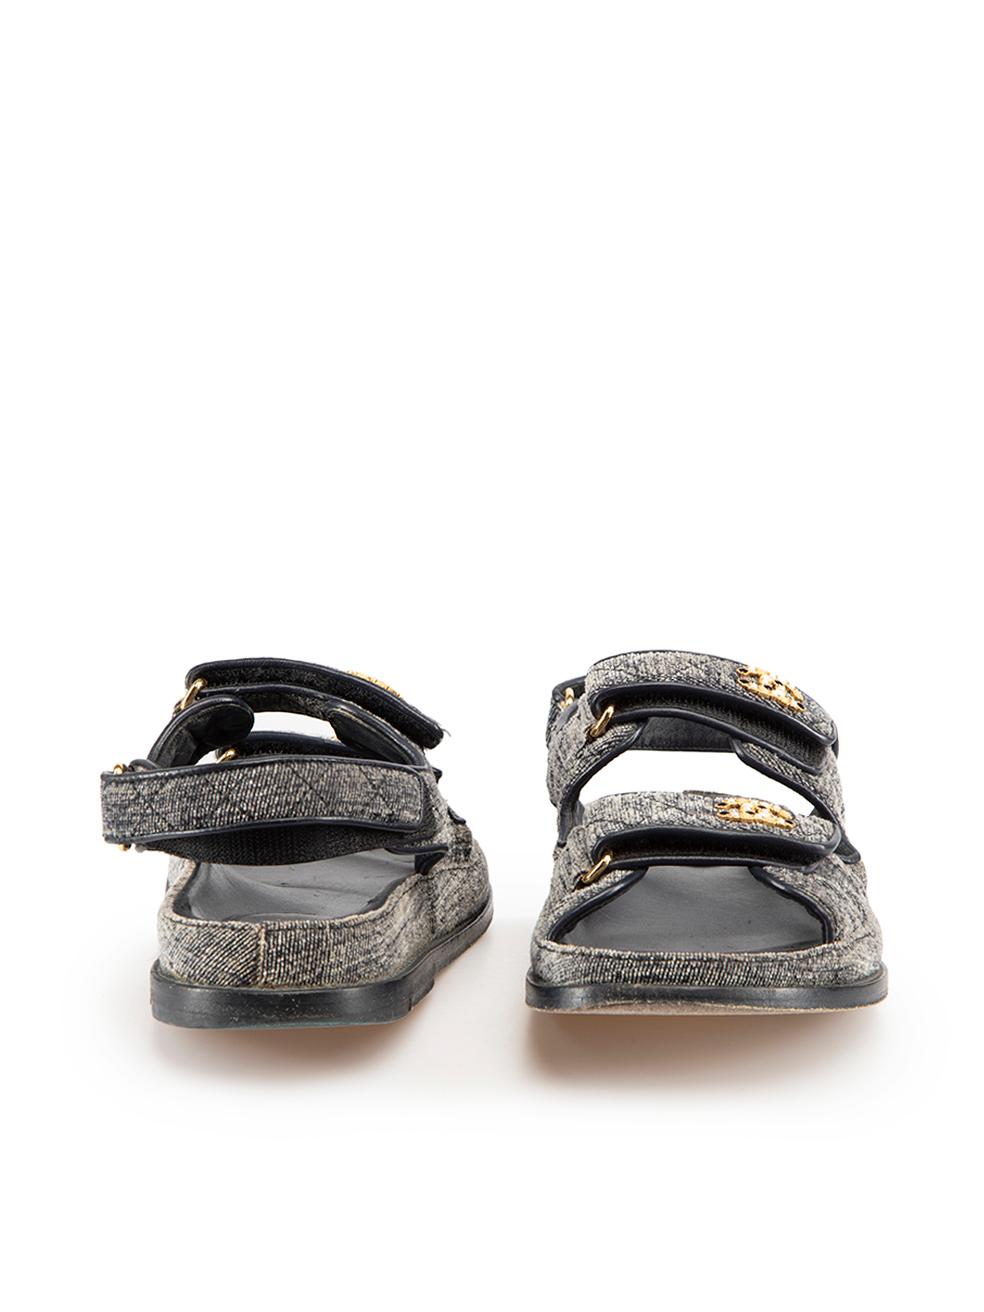 Chanel Navy Dad Denim Sandals Size IT 38 In Good Condition For Sale In London, GB